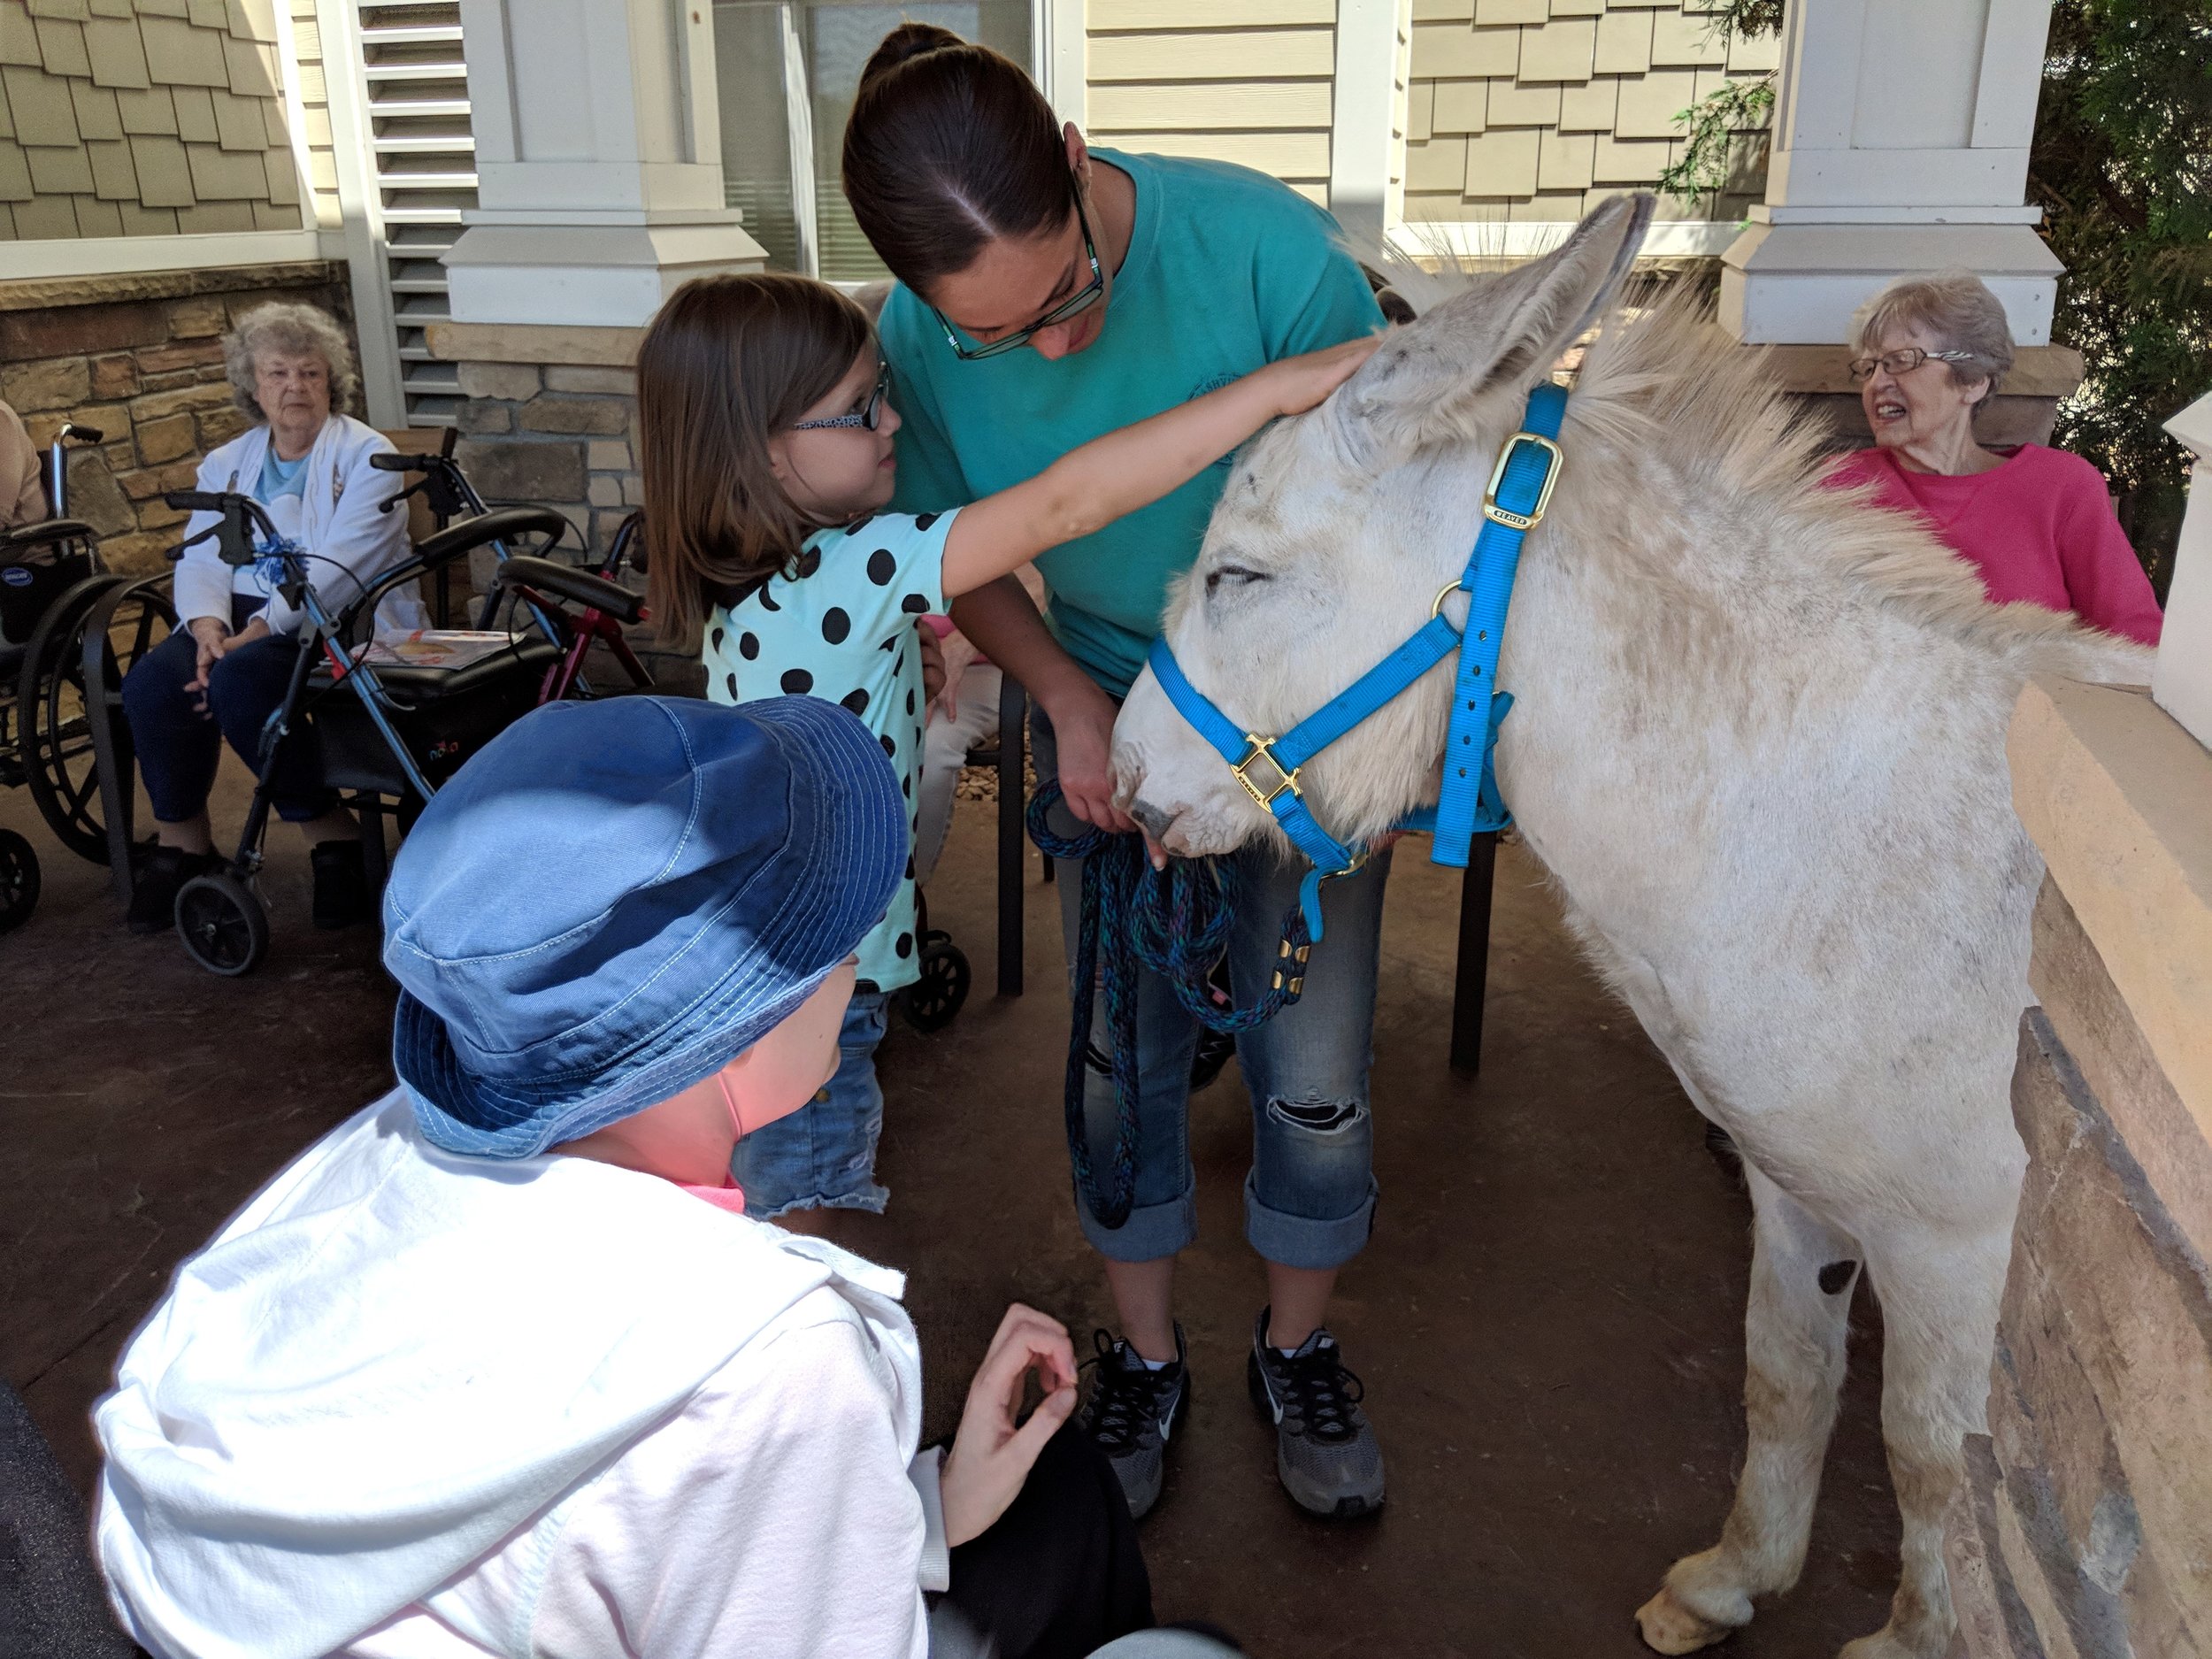 A visit from a fair calf & a donkey!! Thank you Courtney for sharing your time and animals with our tenants!.jpg